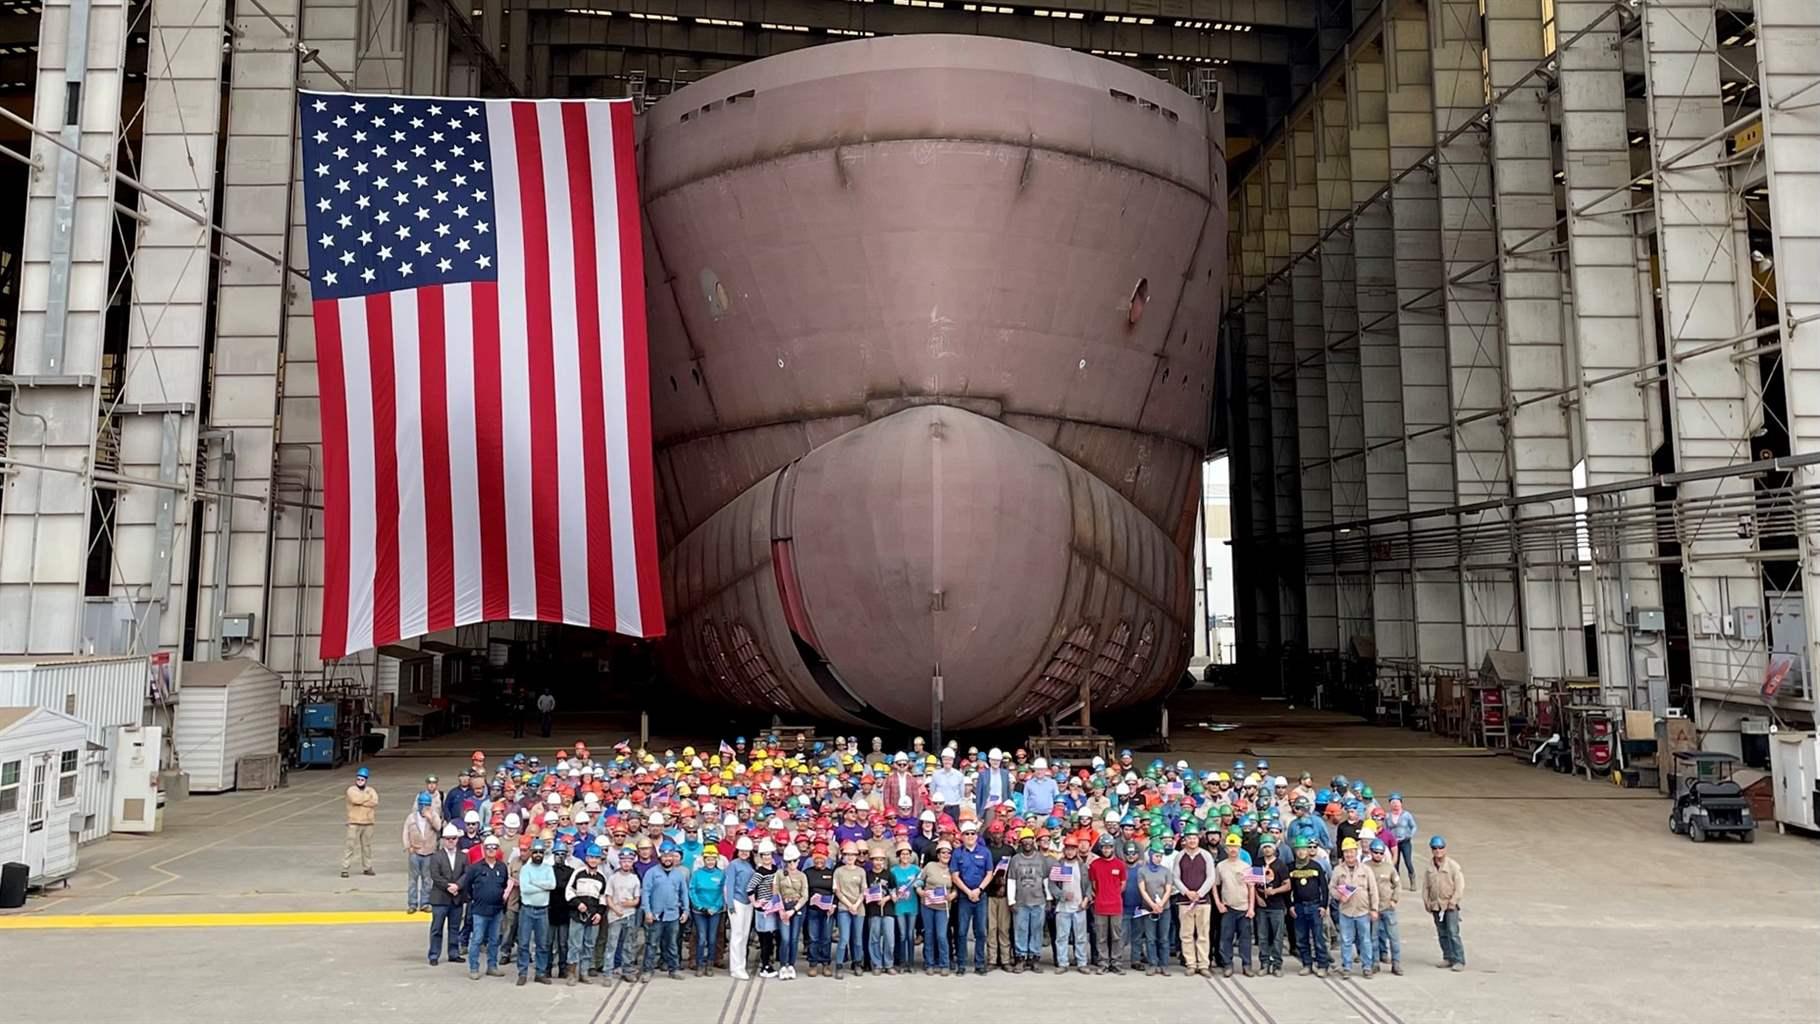 A group of at least 100 people stand on a concrete dry dock in front of the bow of a huge ship that they are helping to build. Massive scaffolding rises on both sides of the boat and extends over its top, and a large American flag hangs from that scaffolding next to the ship’s bow.